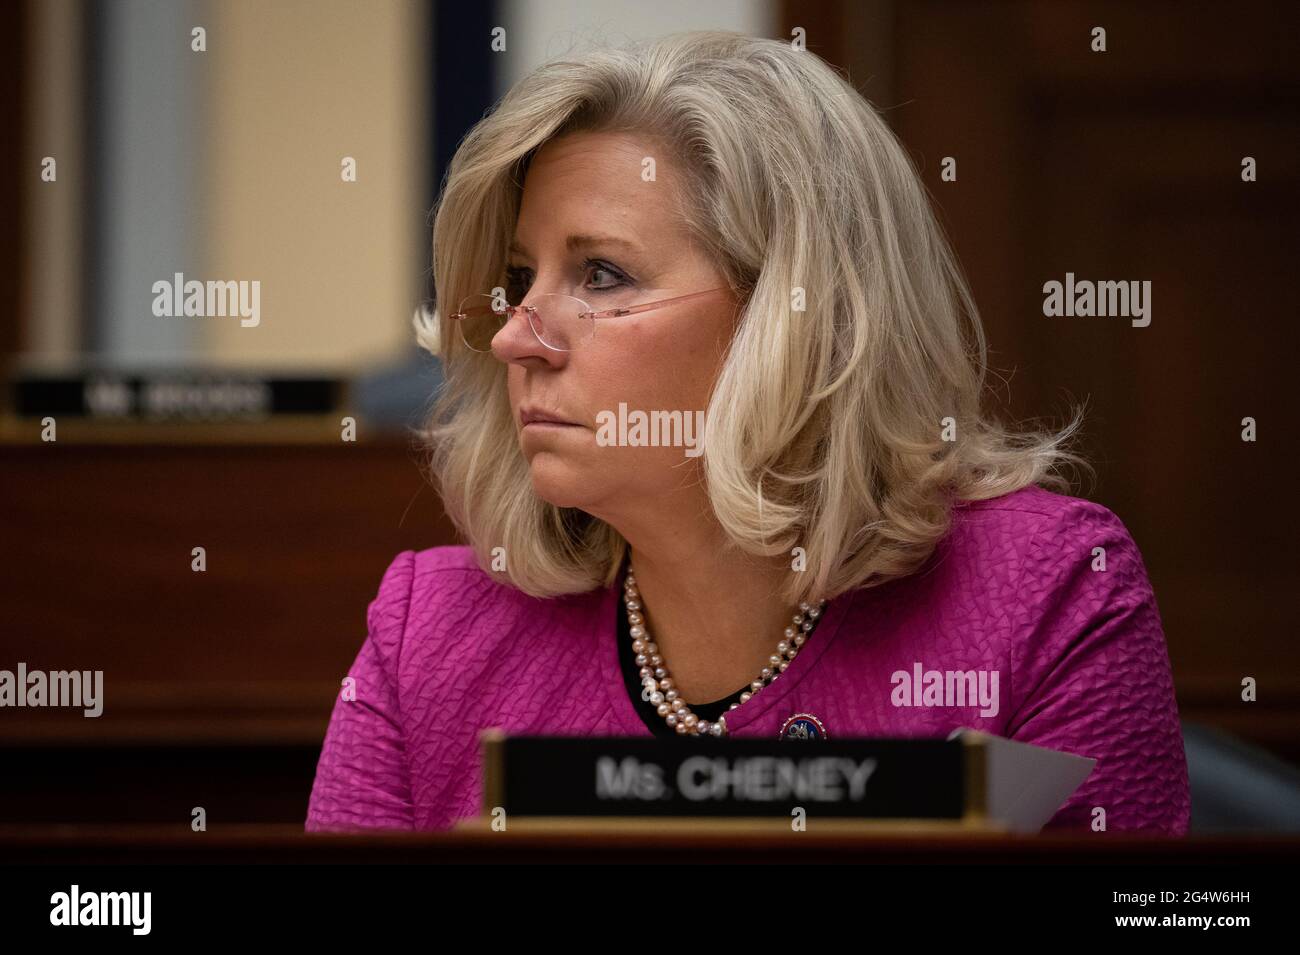 Washington, USA. 23rd June, 2021. Representative Liz Cheney (R-WY) during a House Armed Services Committee hearing, at the U.S. Capitol, in Washington, DC, on Wednesday, June 23, 2021. Last night Senate Republicans filibustered a voting rights bill as bipartisan negotiations over infrastructure legislation grind on with little apparent progress building a package to beat the 60-vote filibuster threshold. (Graeme Sloan/Sipa USA) Credit: Sipa USA/Alamy Live News Stock Photo